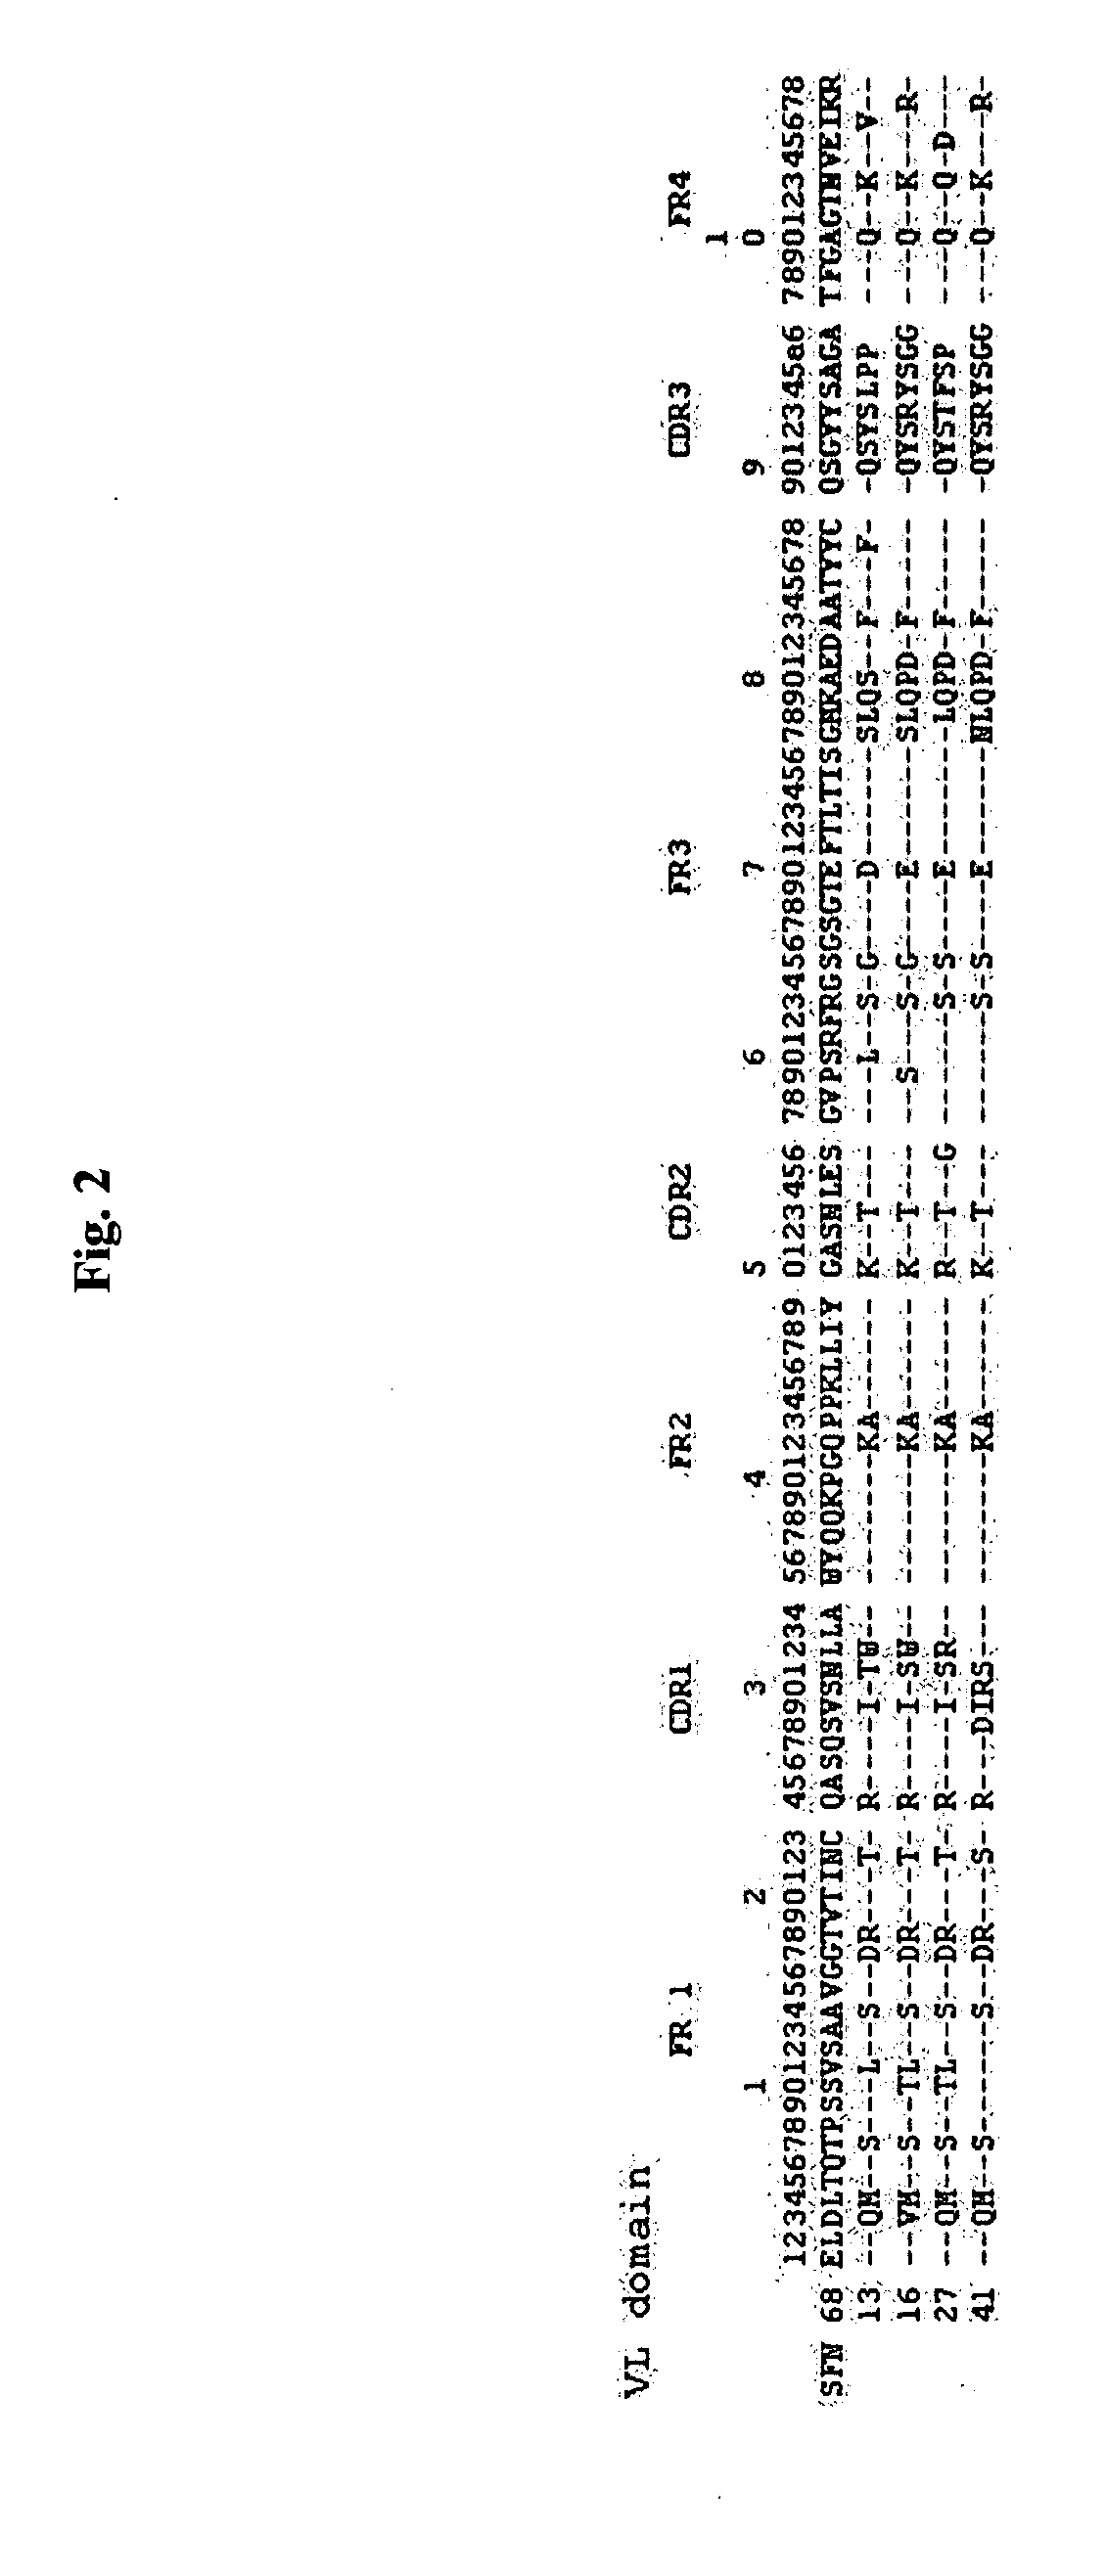 Anti-HGF/SF humanized antibody and method for the preparation thereof